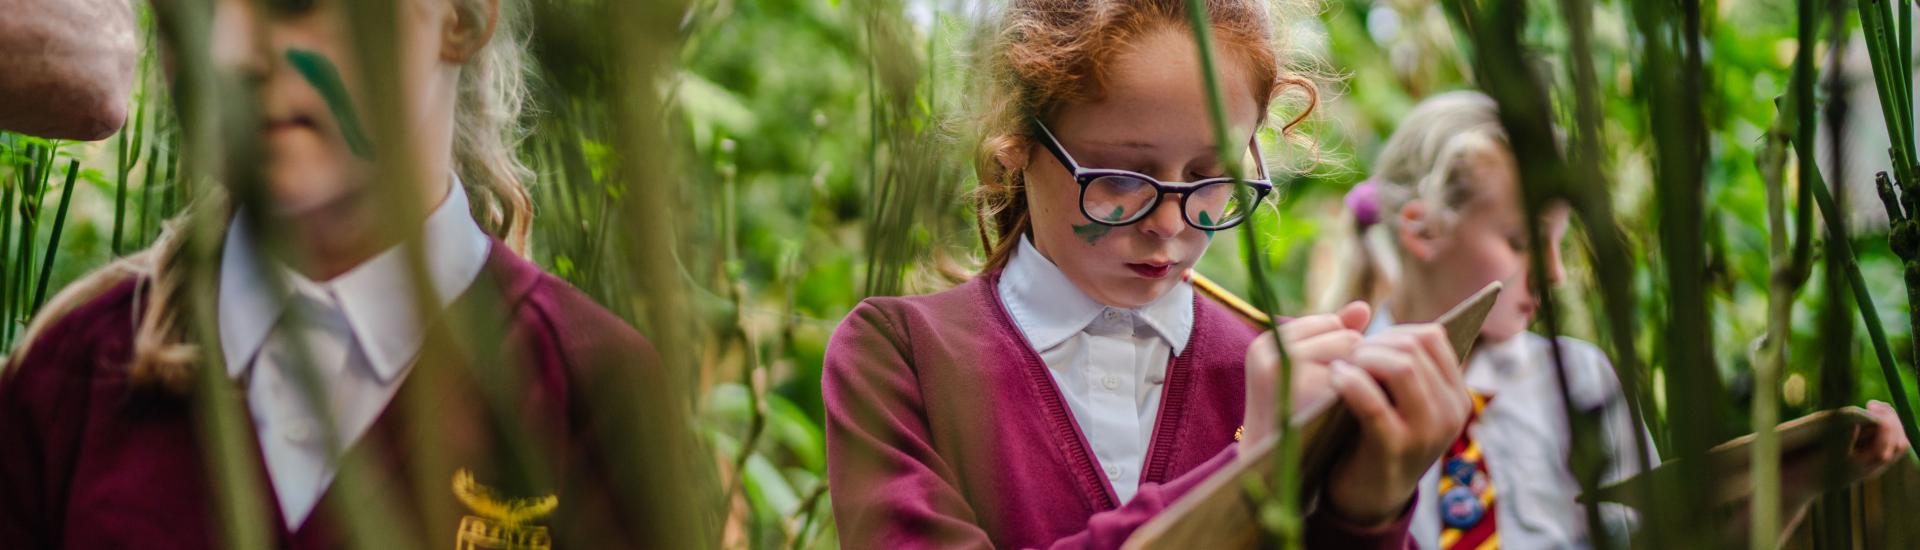 A group of school pupils walking through a biome, you can see them through the greenery and they are writing on clipboards